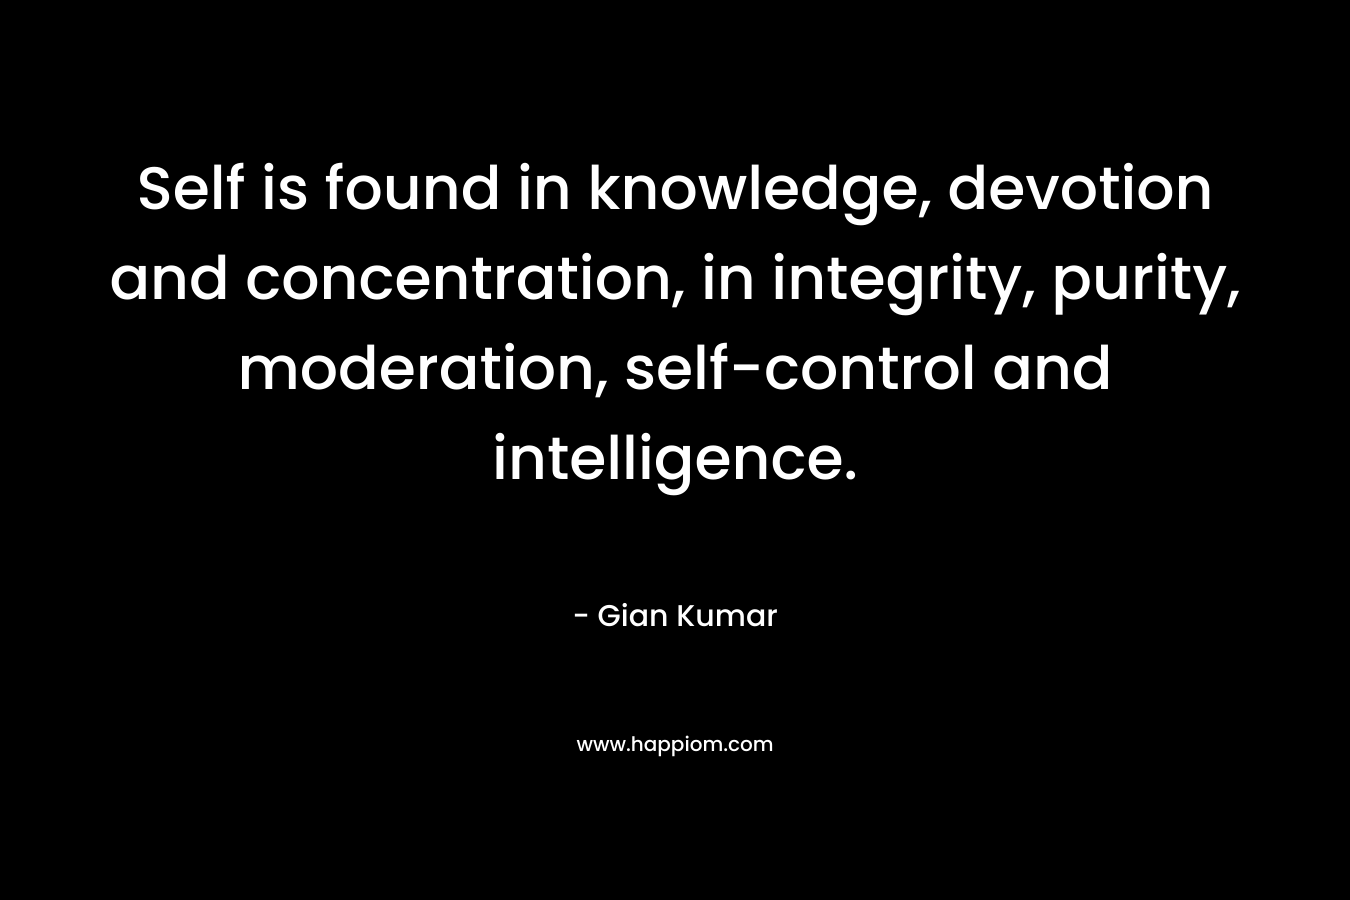 Self is found in knowledge, devotion and concentration, in integrity, purity, moderation, self-control and intelligence. – Gian Kumar